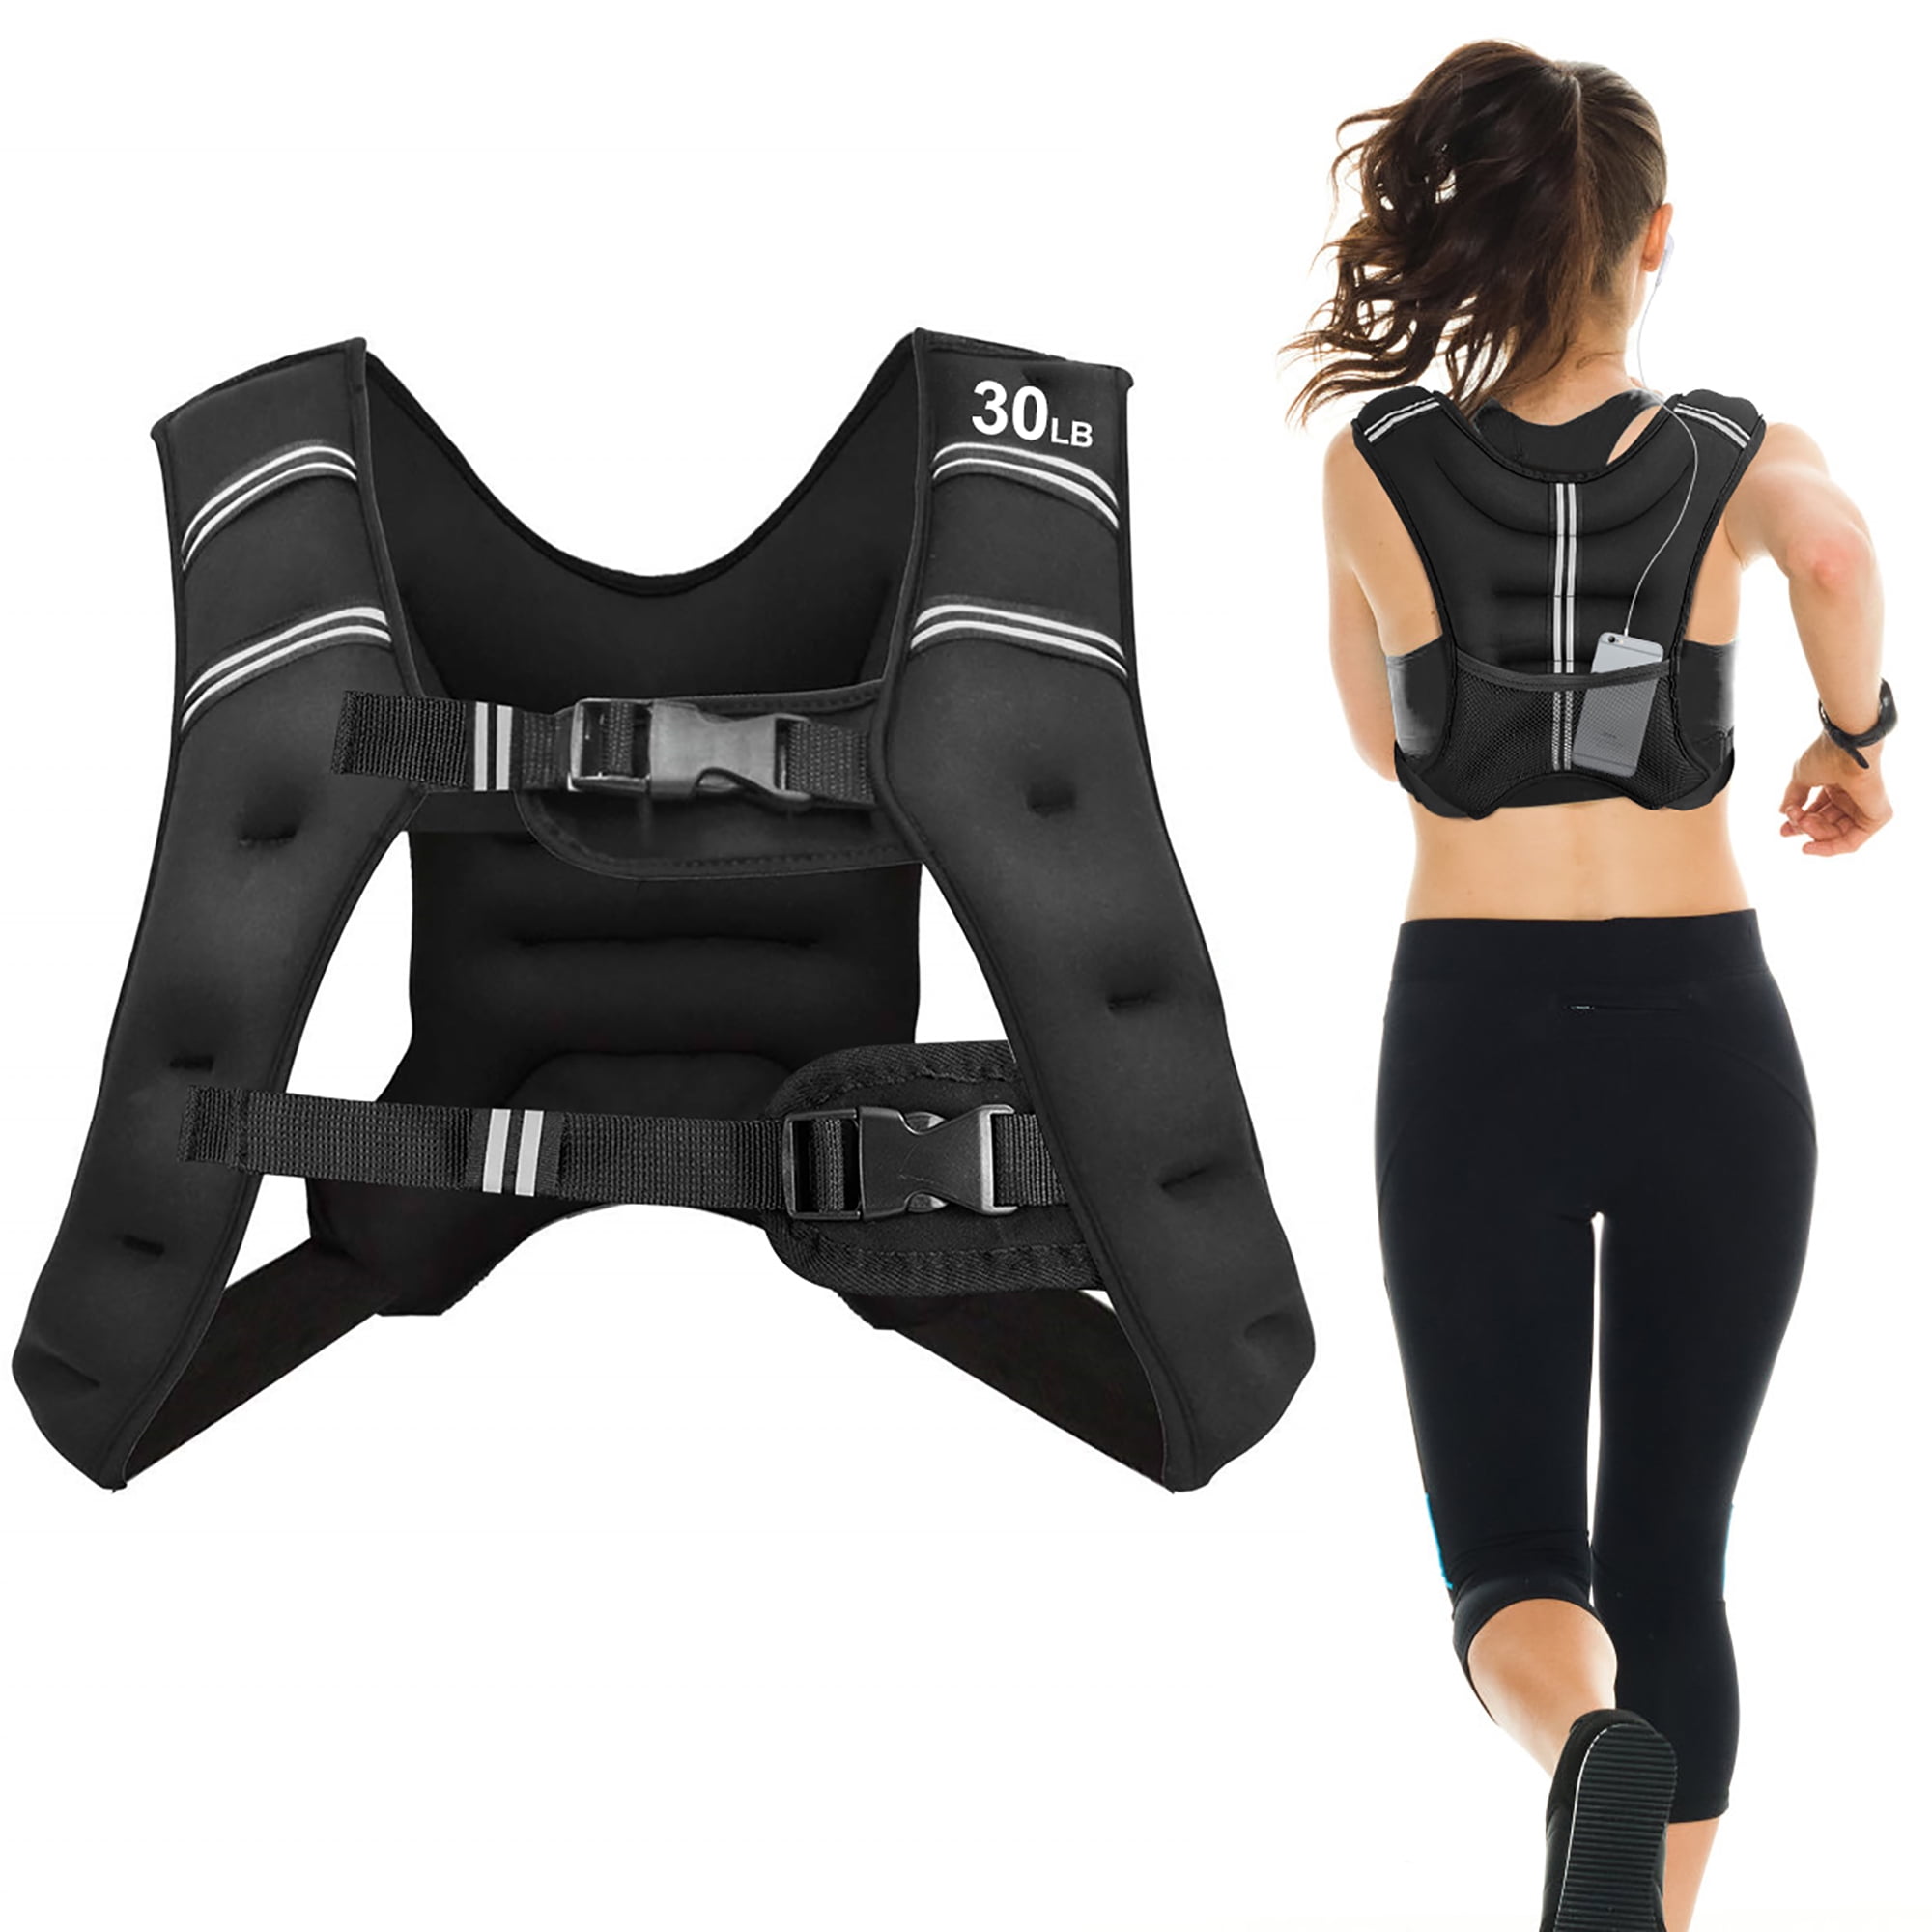 Details about   Tone Fitness 8lb Weighted Vest 